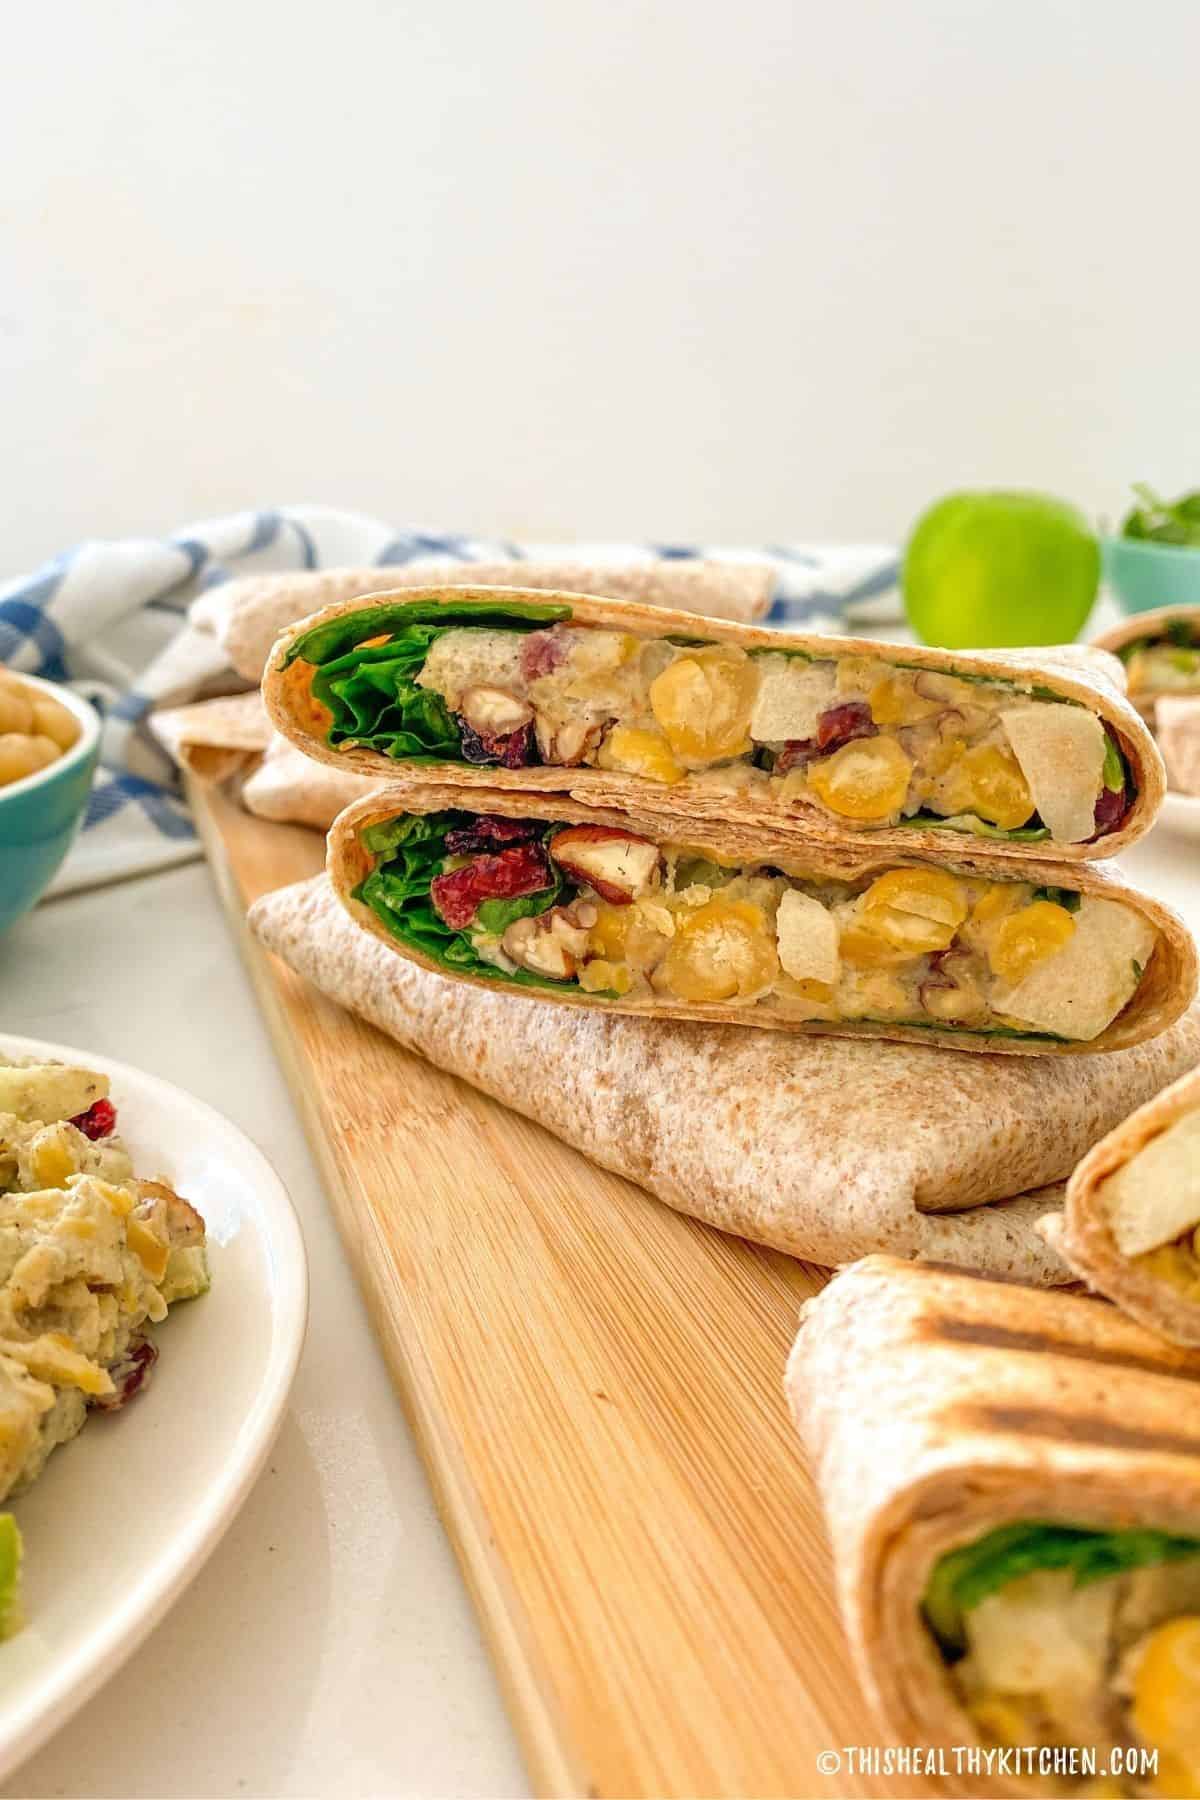 Halved vegan chicken wrap with spinach, chickpeas, apple, pecans and cranberries inside.